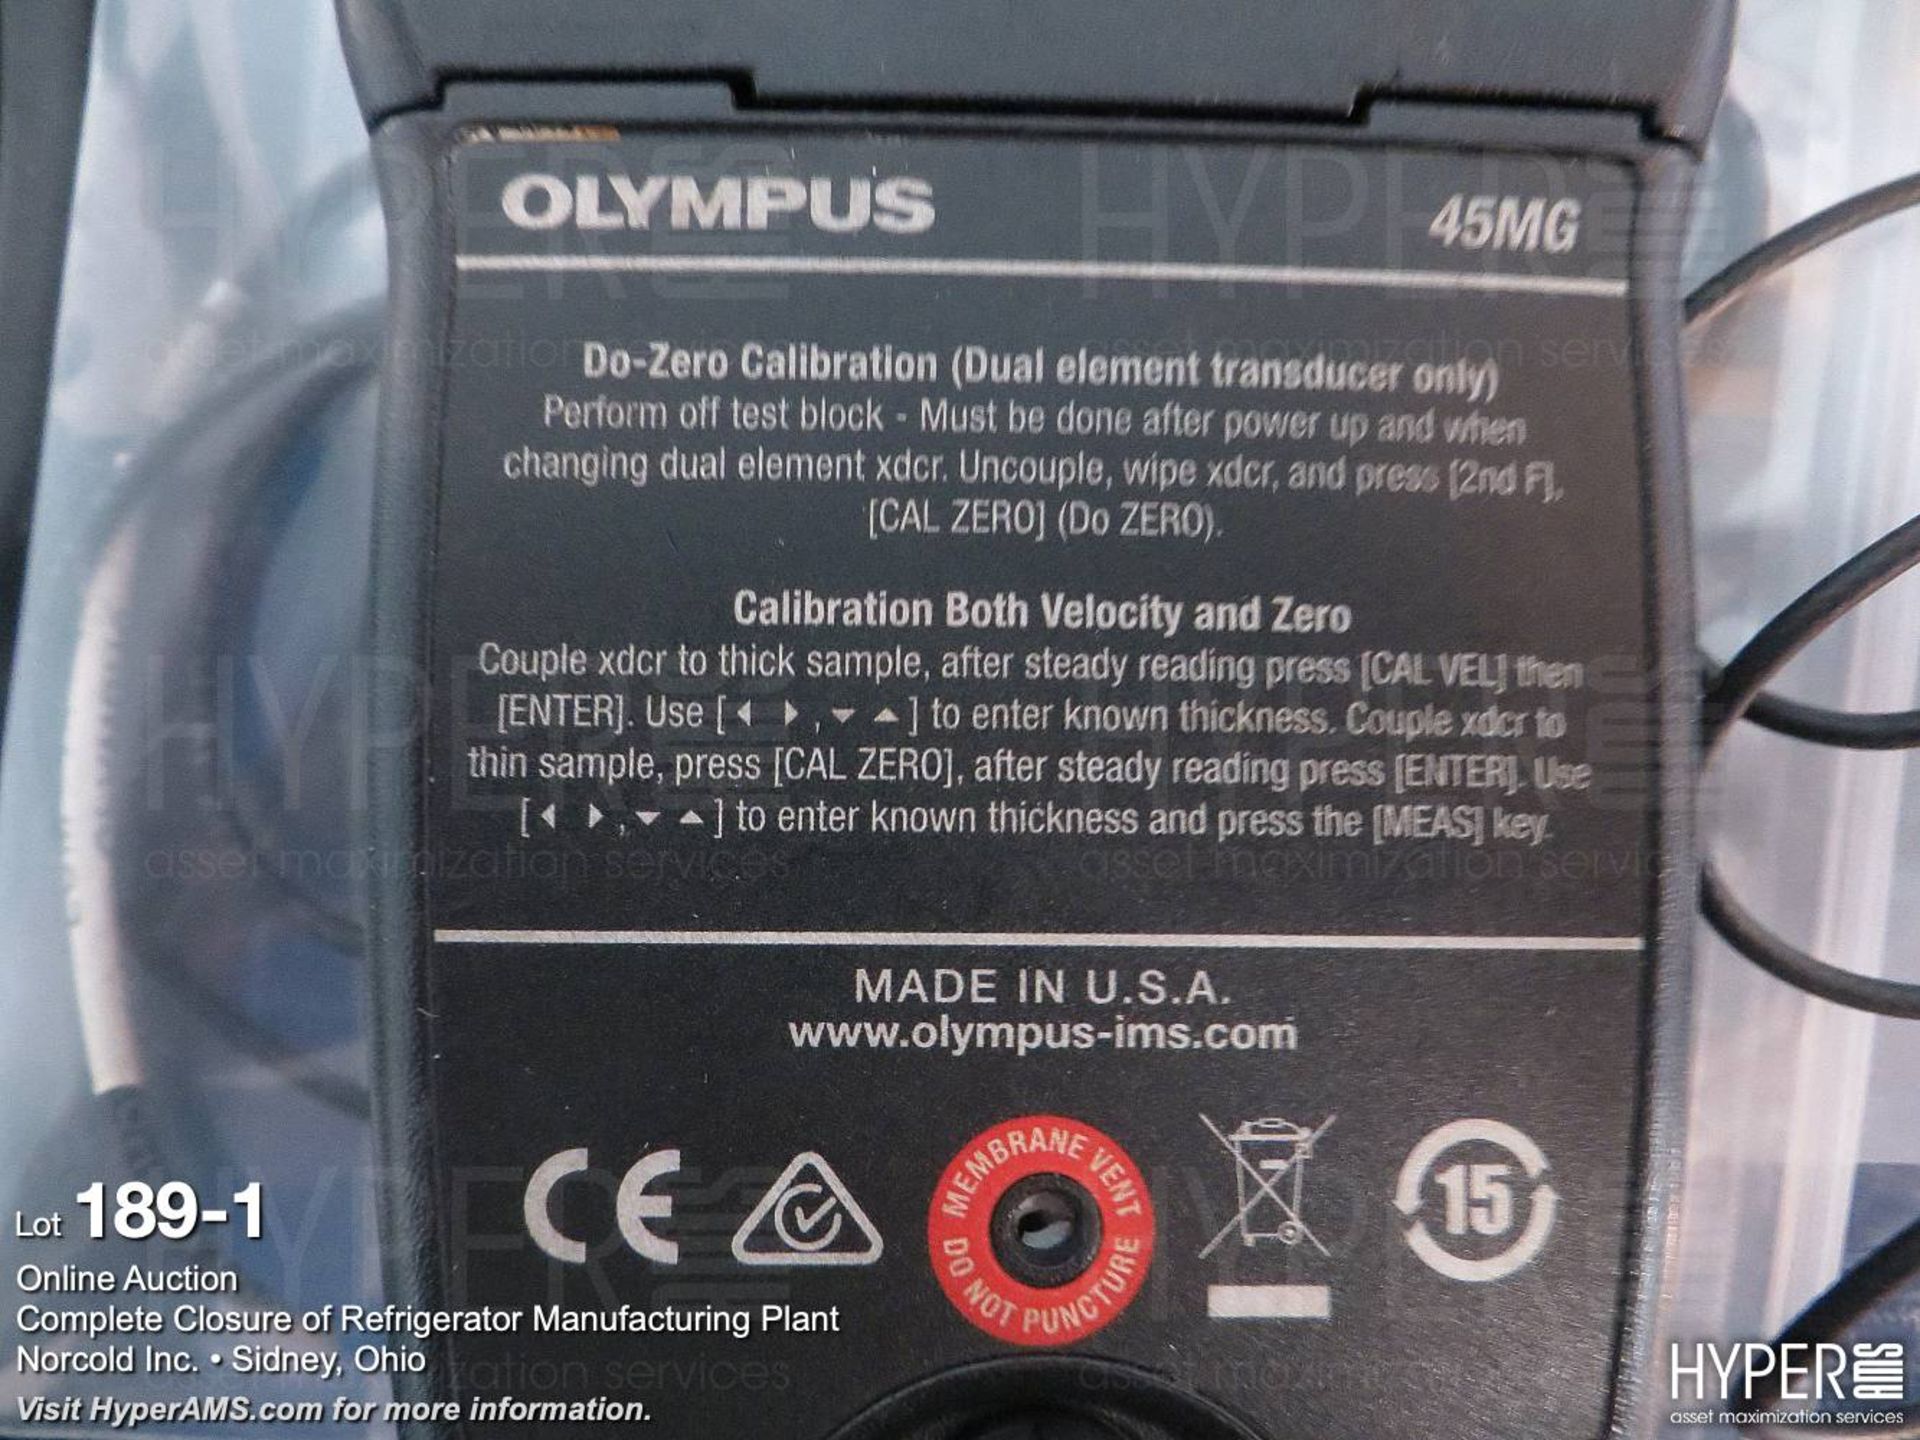 Olympus 45 MG ultrasonic thickness gauges - Image 2 of 2